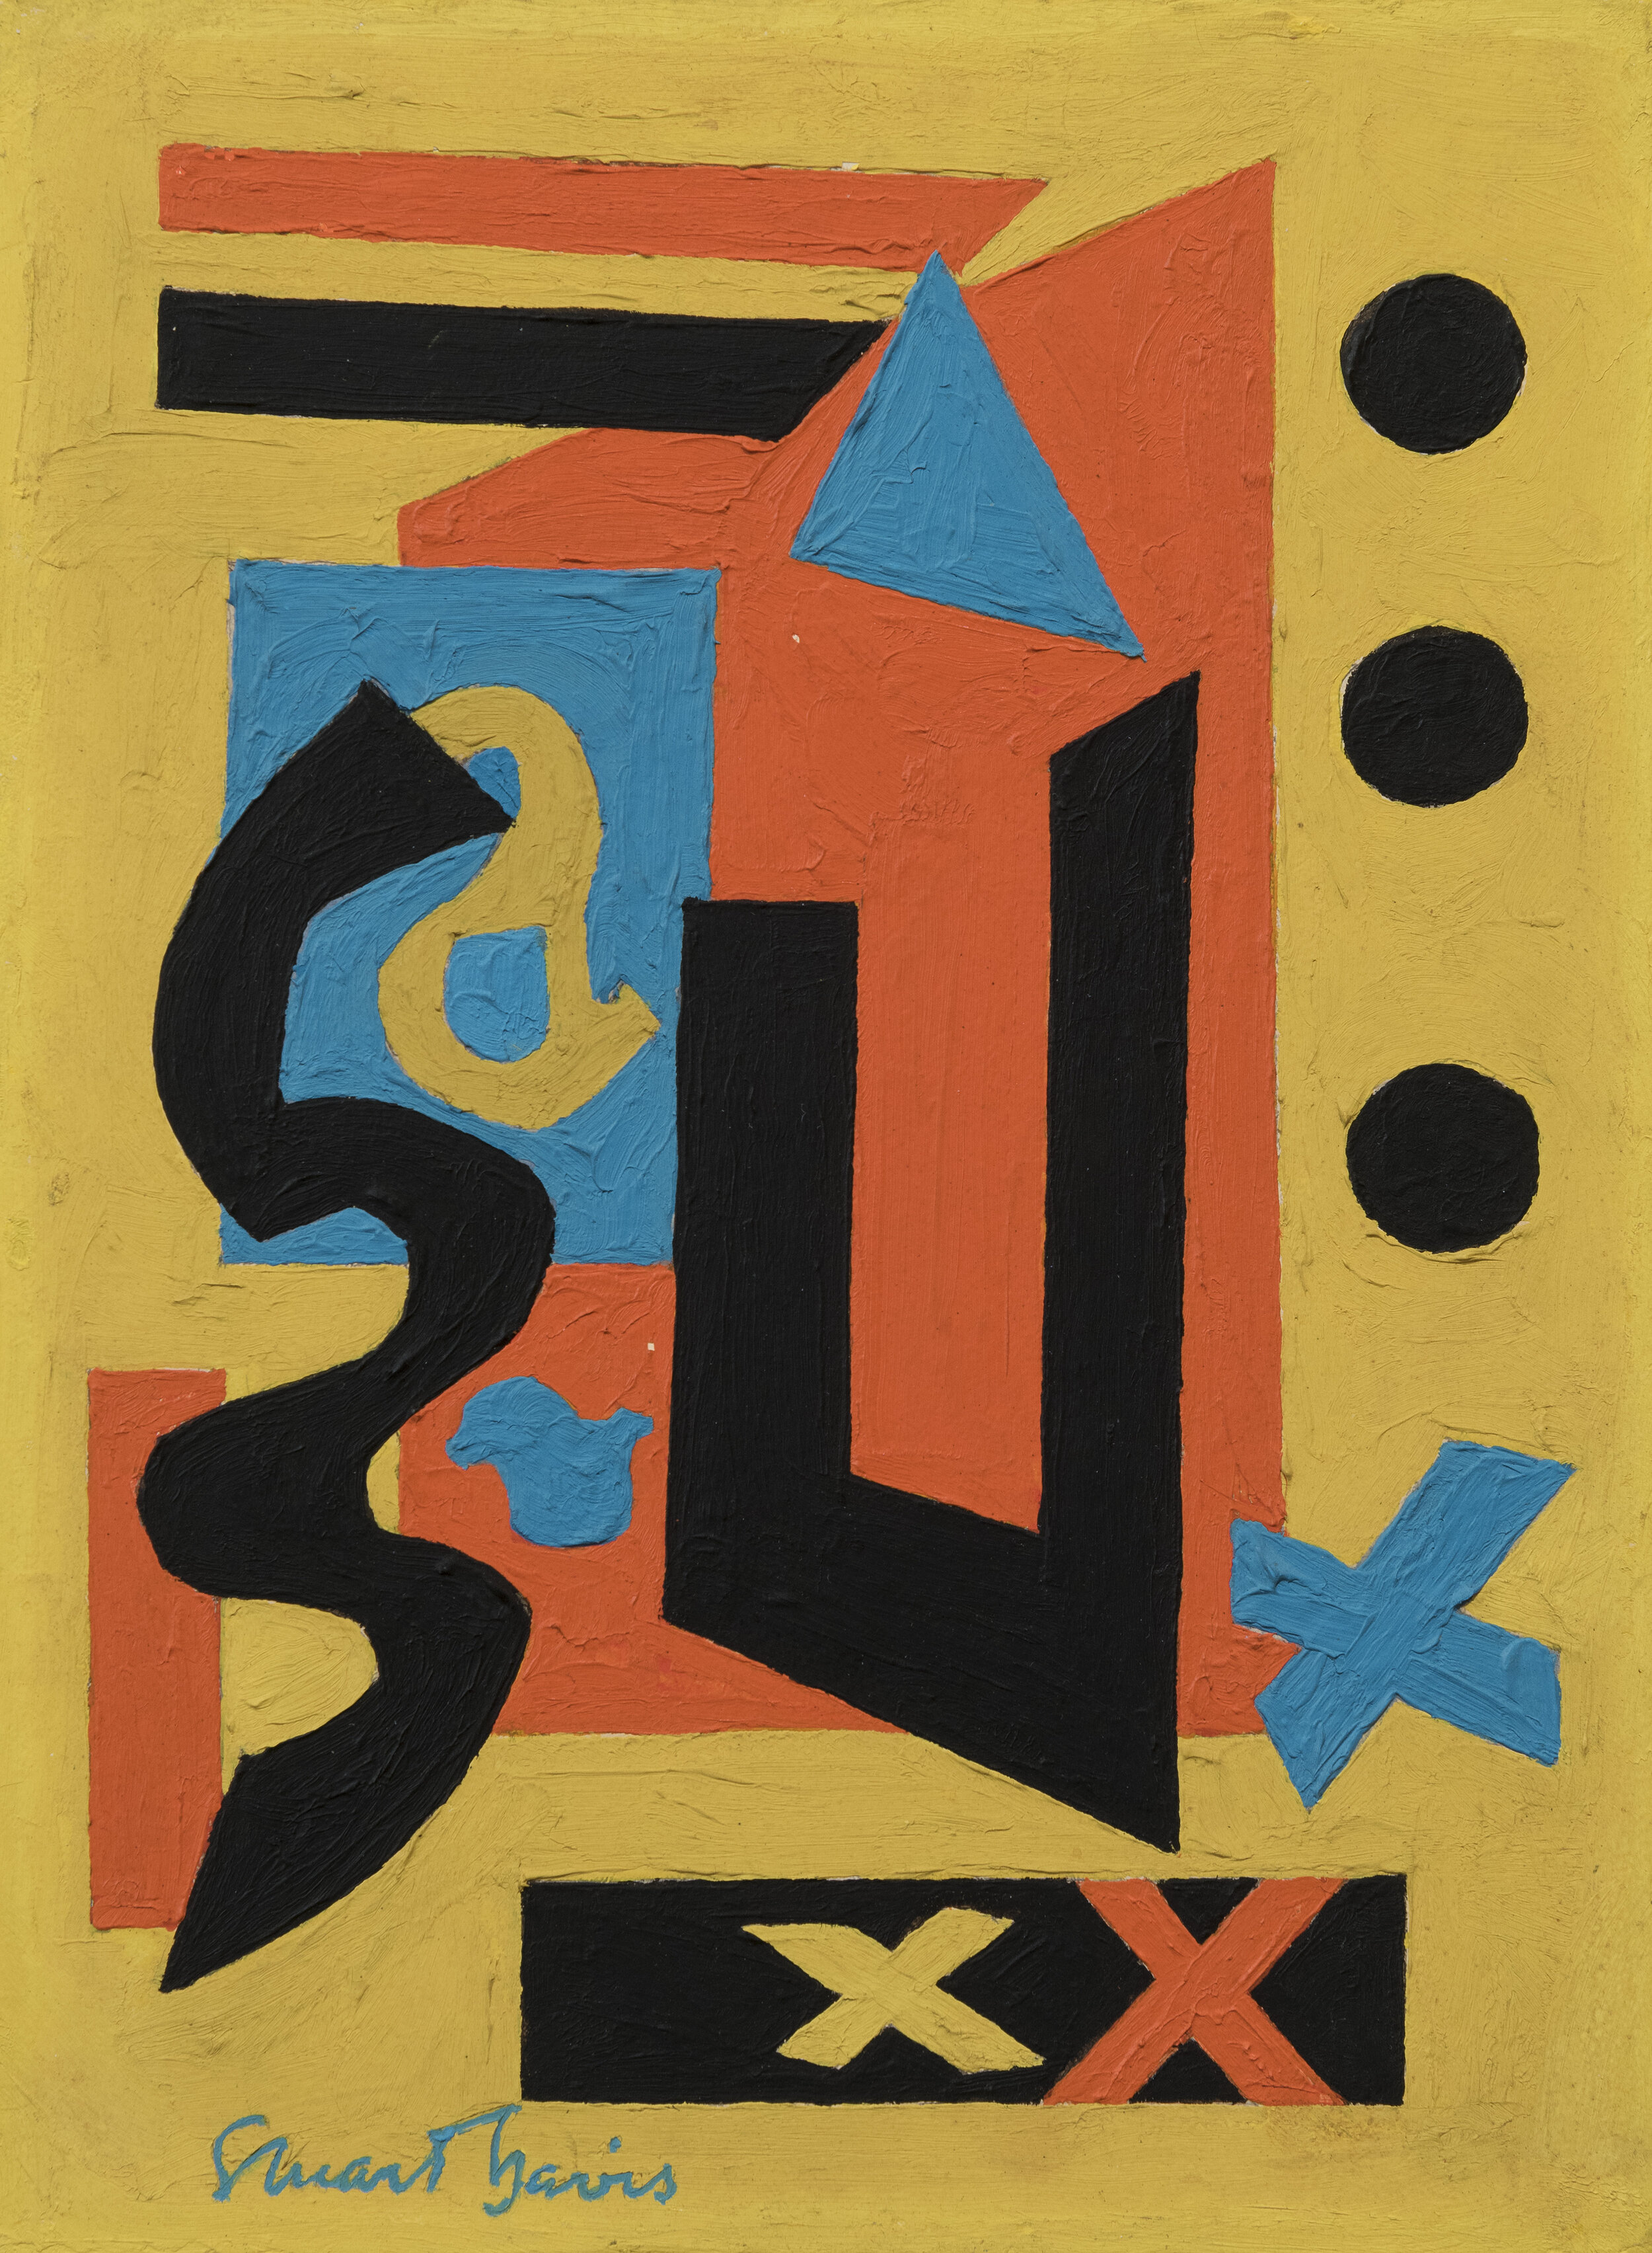 Abstract painting on yellow background  with orange, blue, and black shapes and symbols